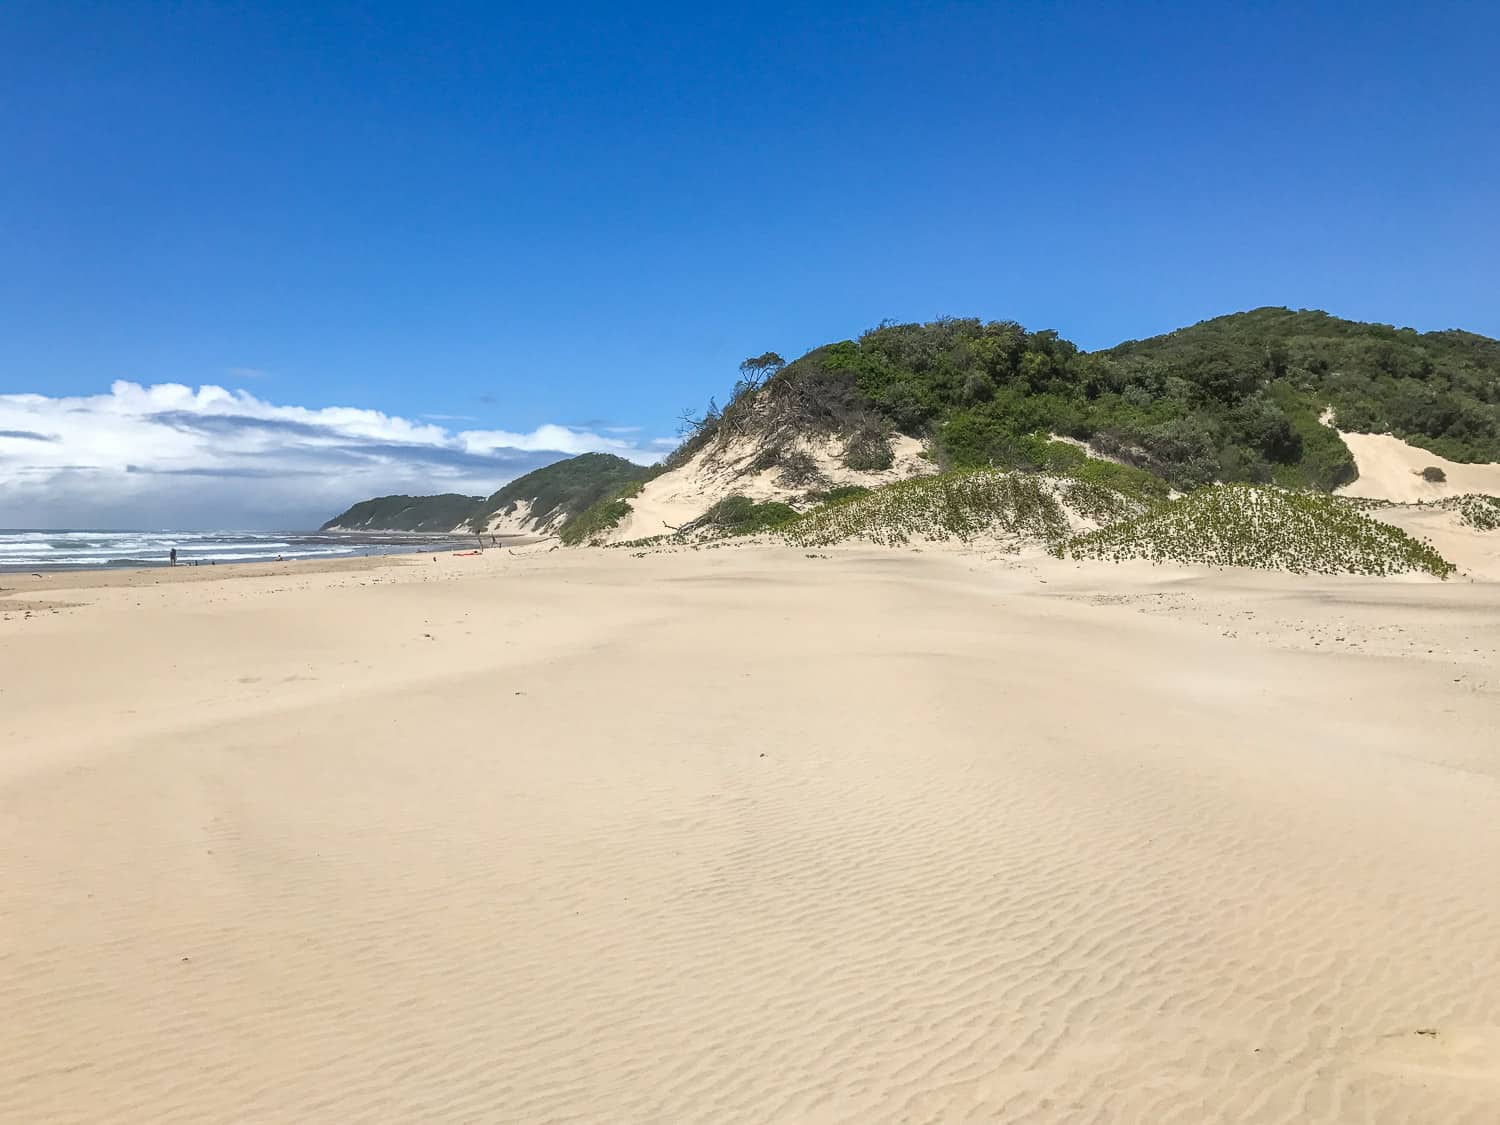 Chinta beach - a top on our South Africa road trip